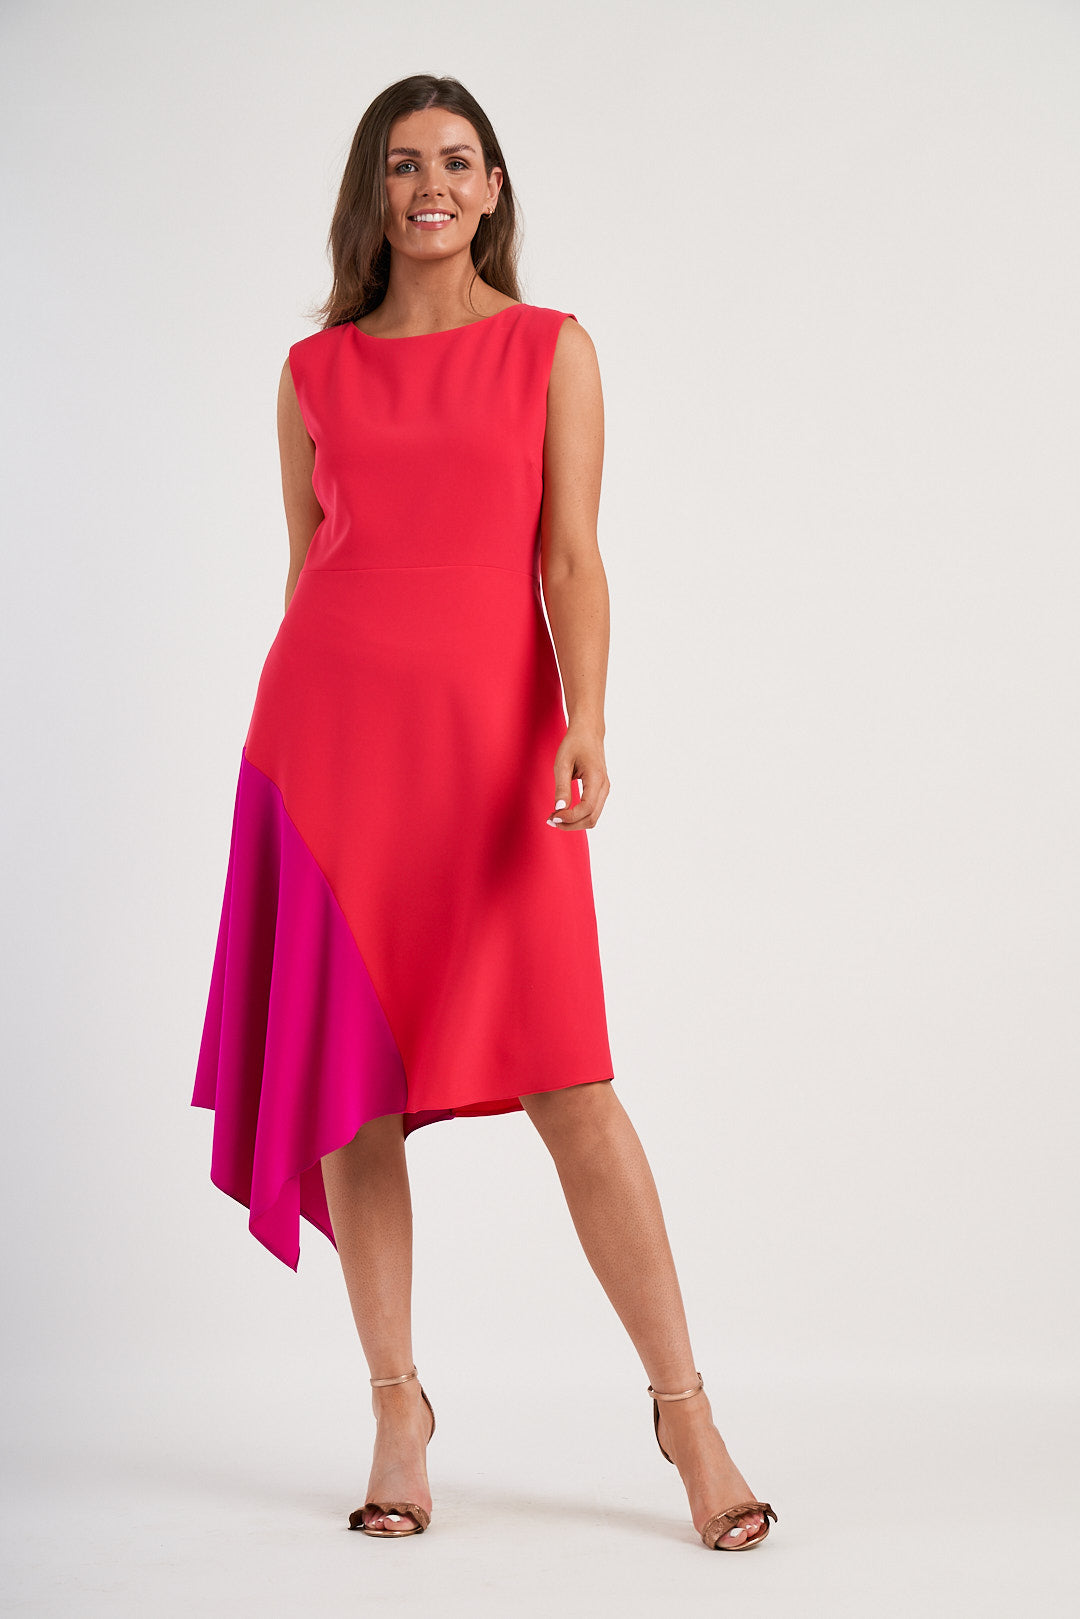 FEE G Bree – Sleeveless dress with contrast panel in skirt